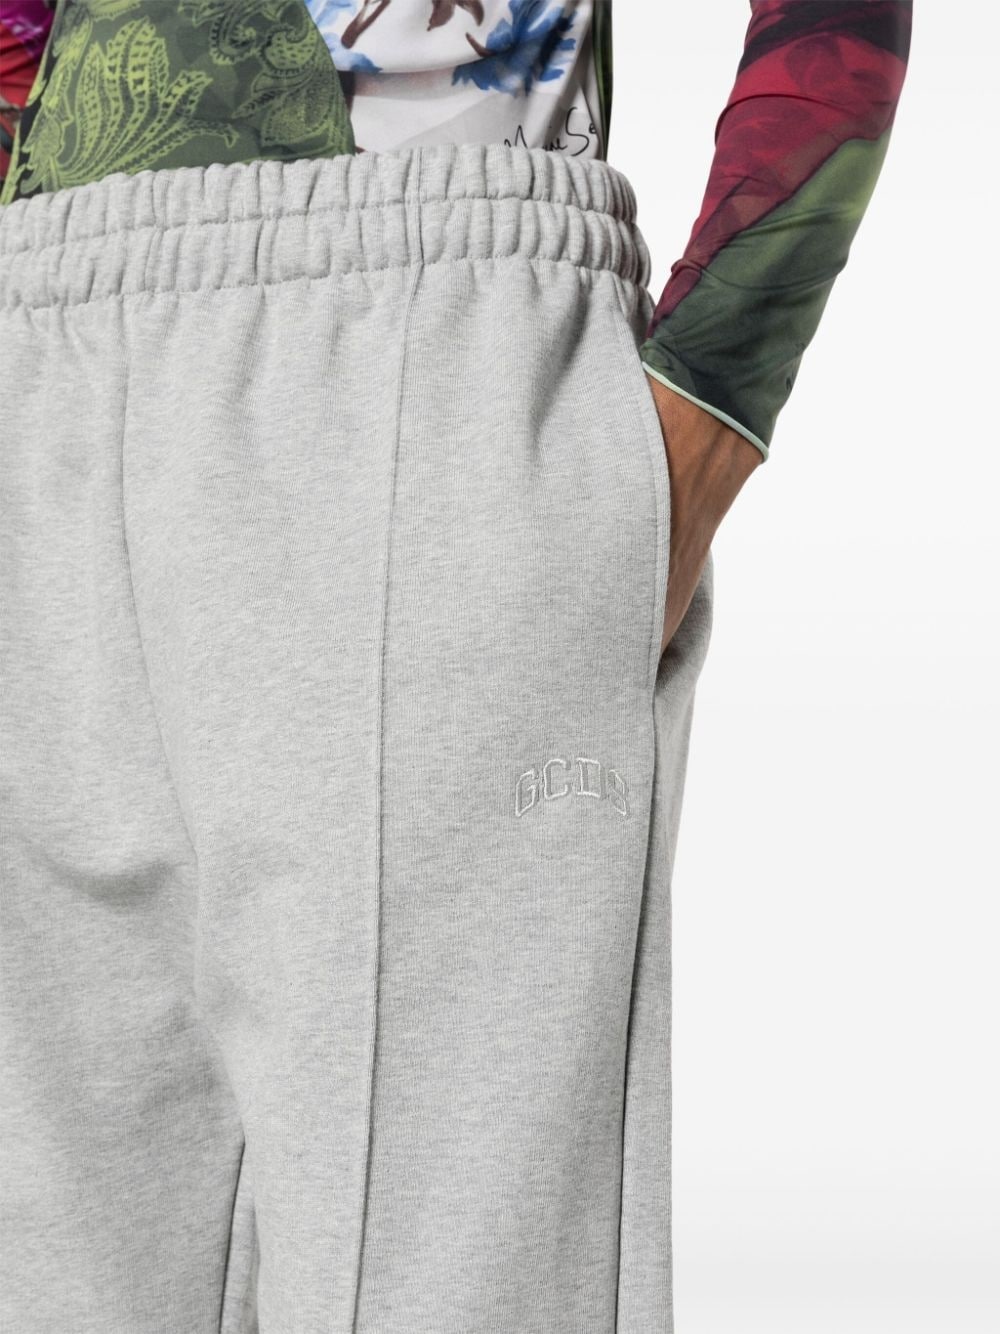 embroidered-logo track pants - 6